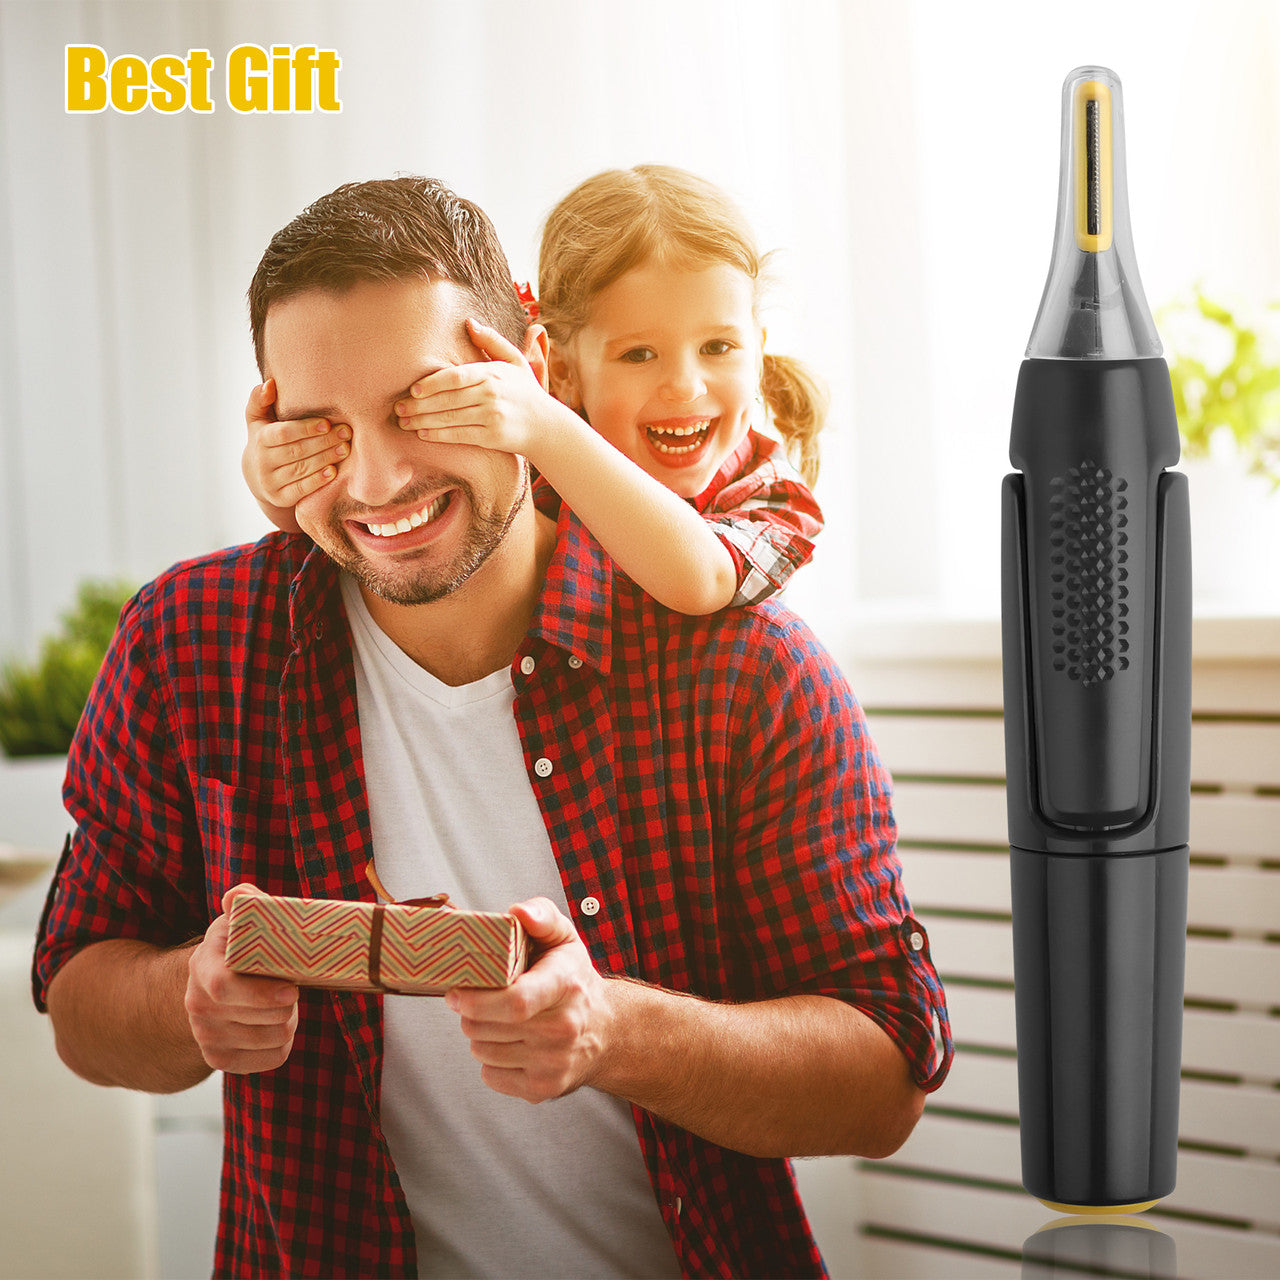 Electric Hair Trimmer with an Anti-Slip Grip and a Ultra Thin Head, 15" Side Elevation Design